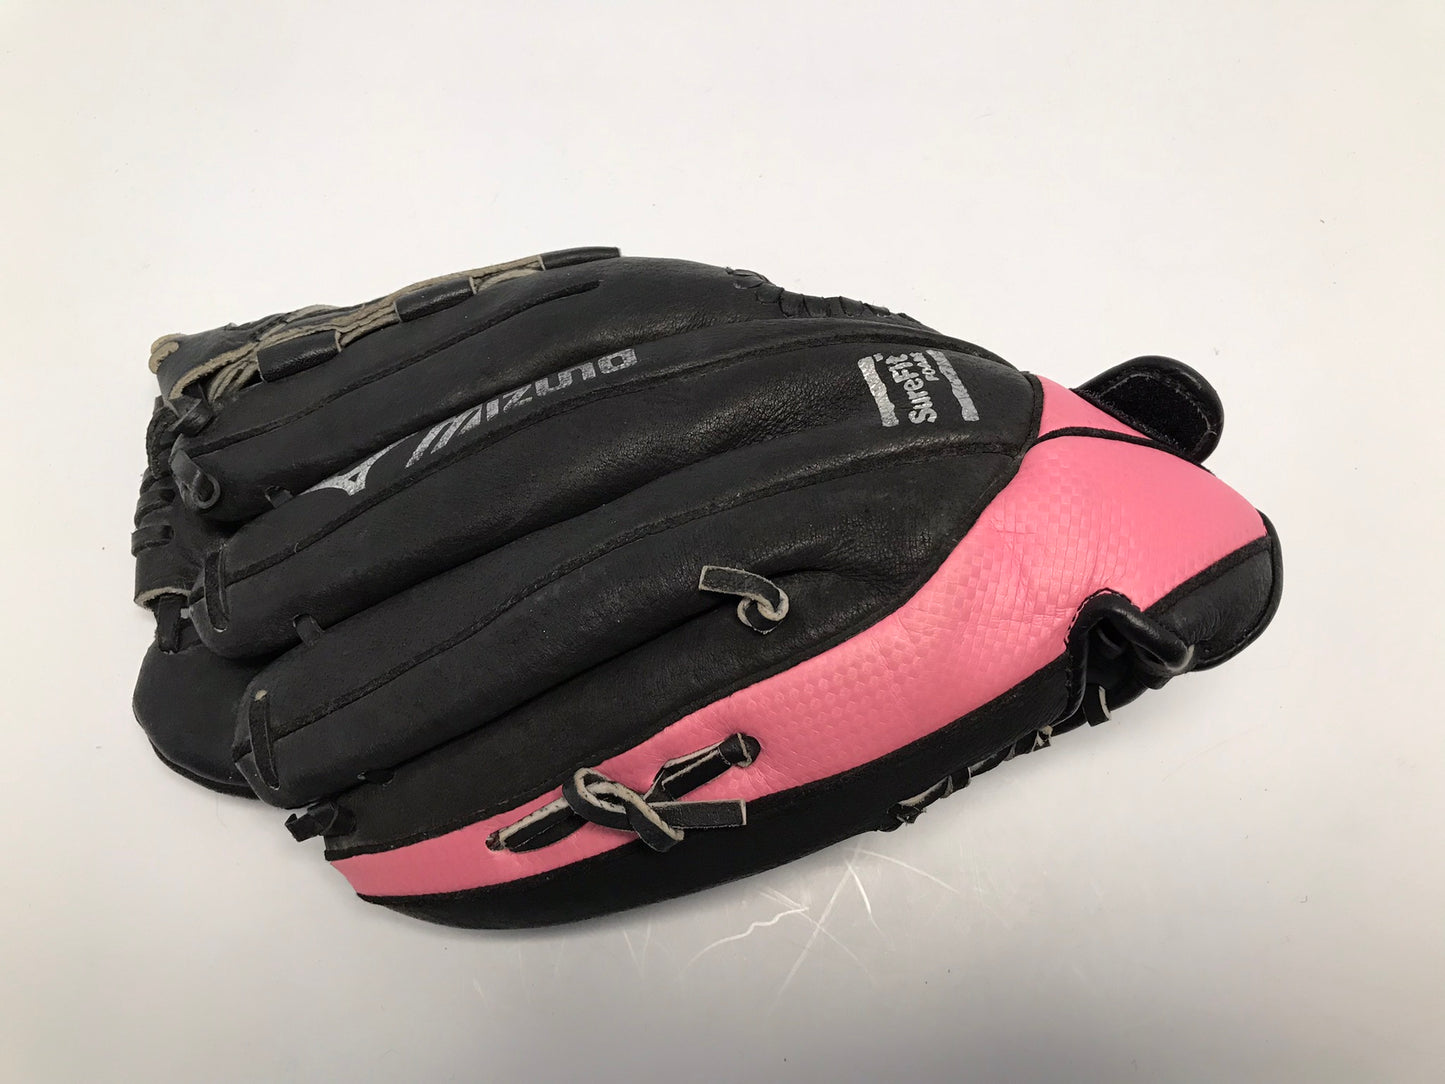 Baseball Glove Adult Size 12 inch Mizuno Black Pink Leather Fits Left Hand As New